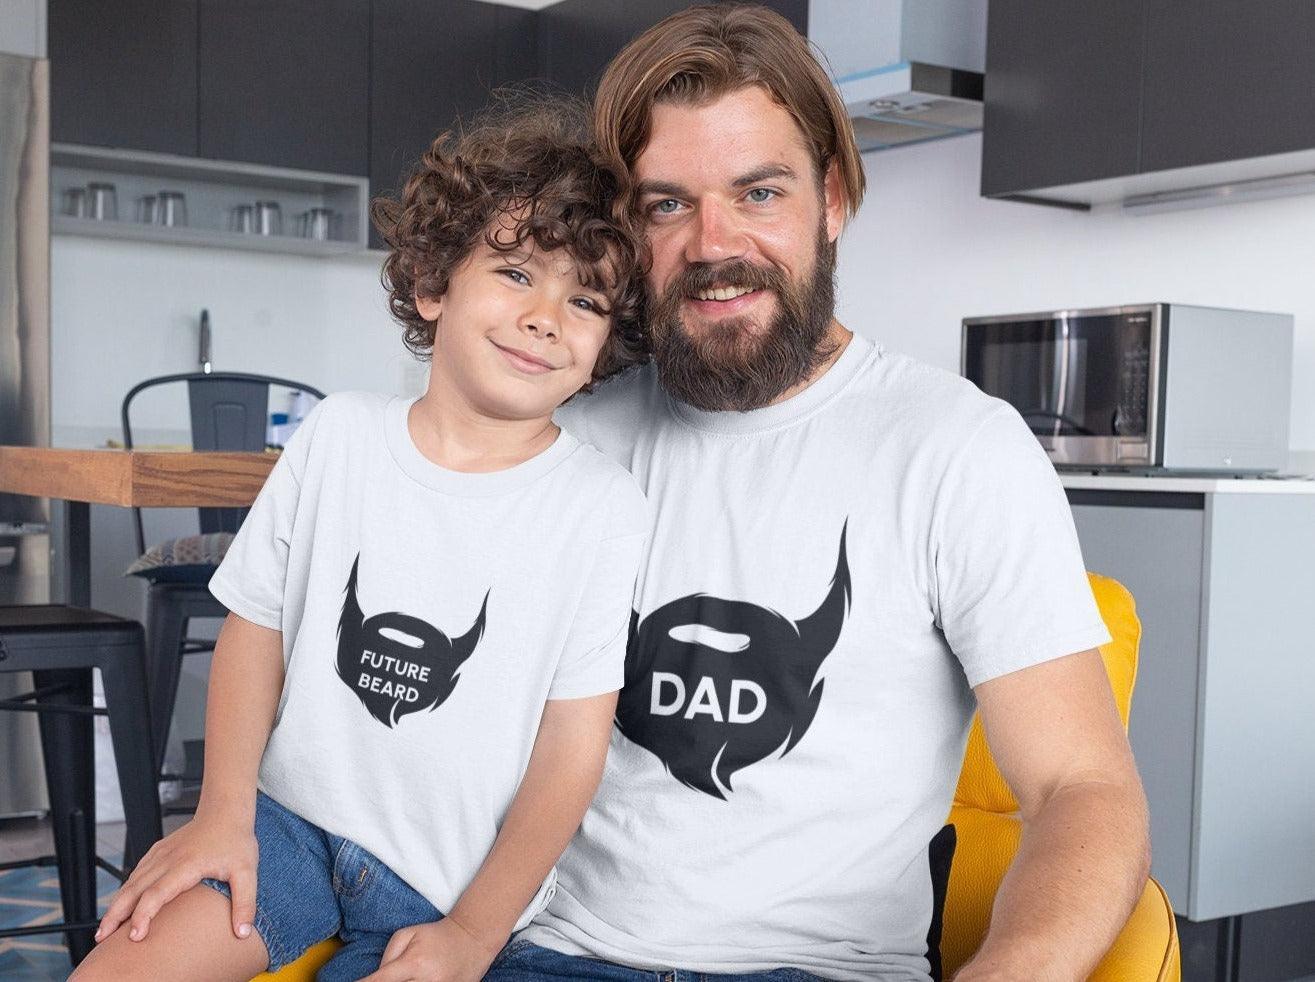 Dad Beard and Future Beard Matching Dad and Son Shirts - Daddy, Mommy & Me - 4Lovebirds